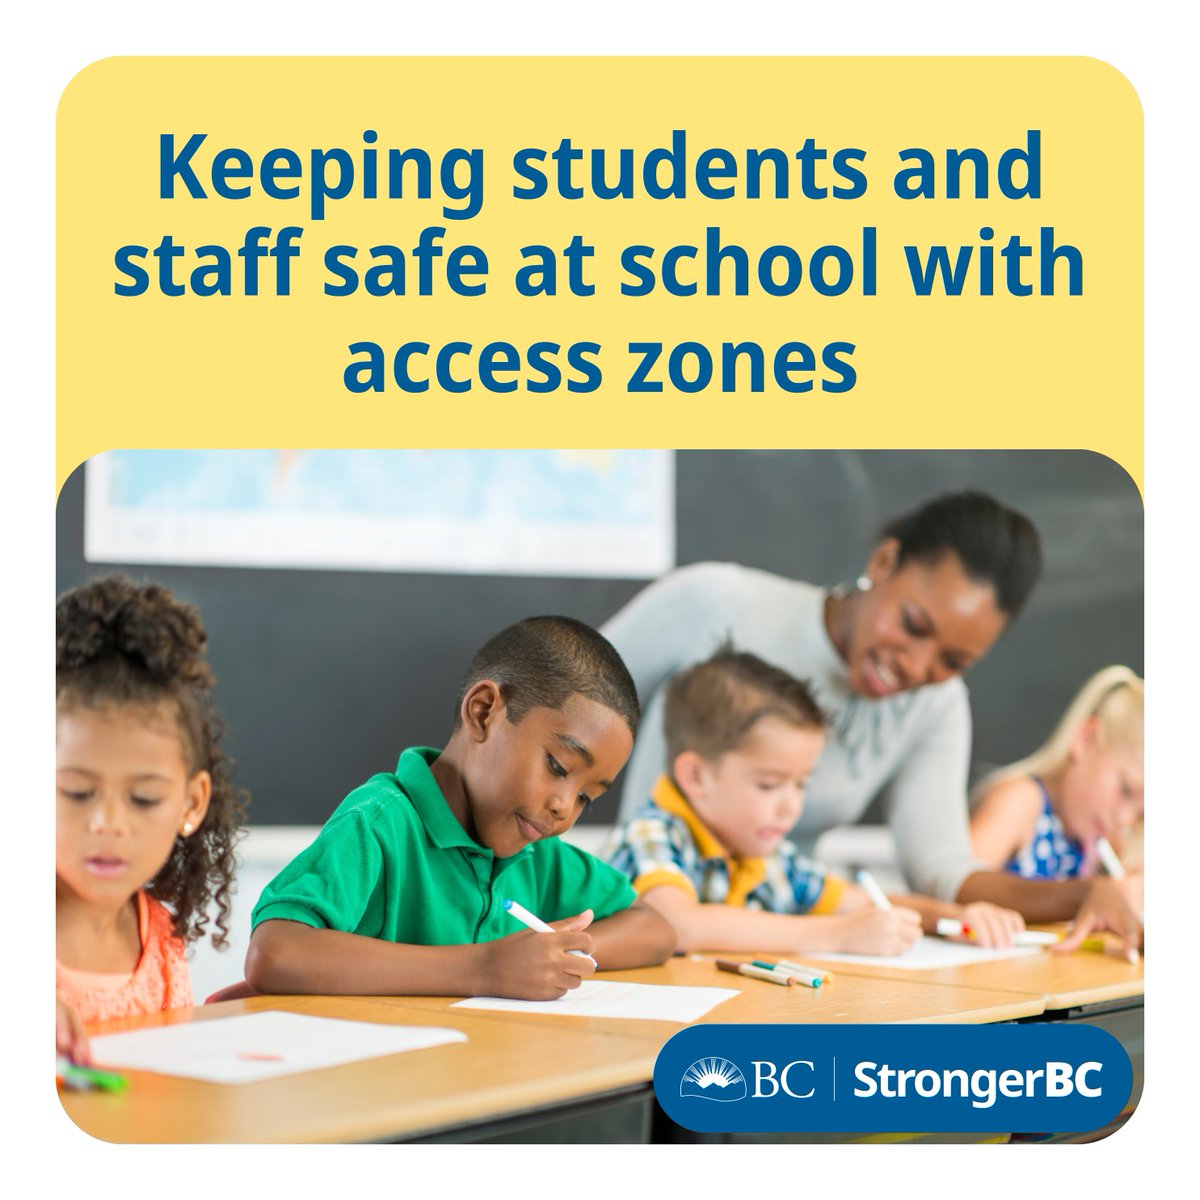 Students & staff need to feel safe at school so they can focus on education. We are taking action to protect students and staff from harmful behaviour on, and around, school grounds. This is just one step we’re taking to keep kids safe at school. StrongerBC.gov.bc.ca/legislation